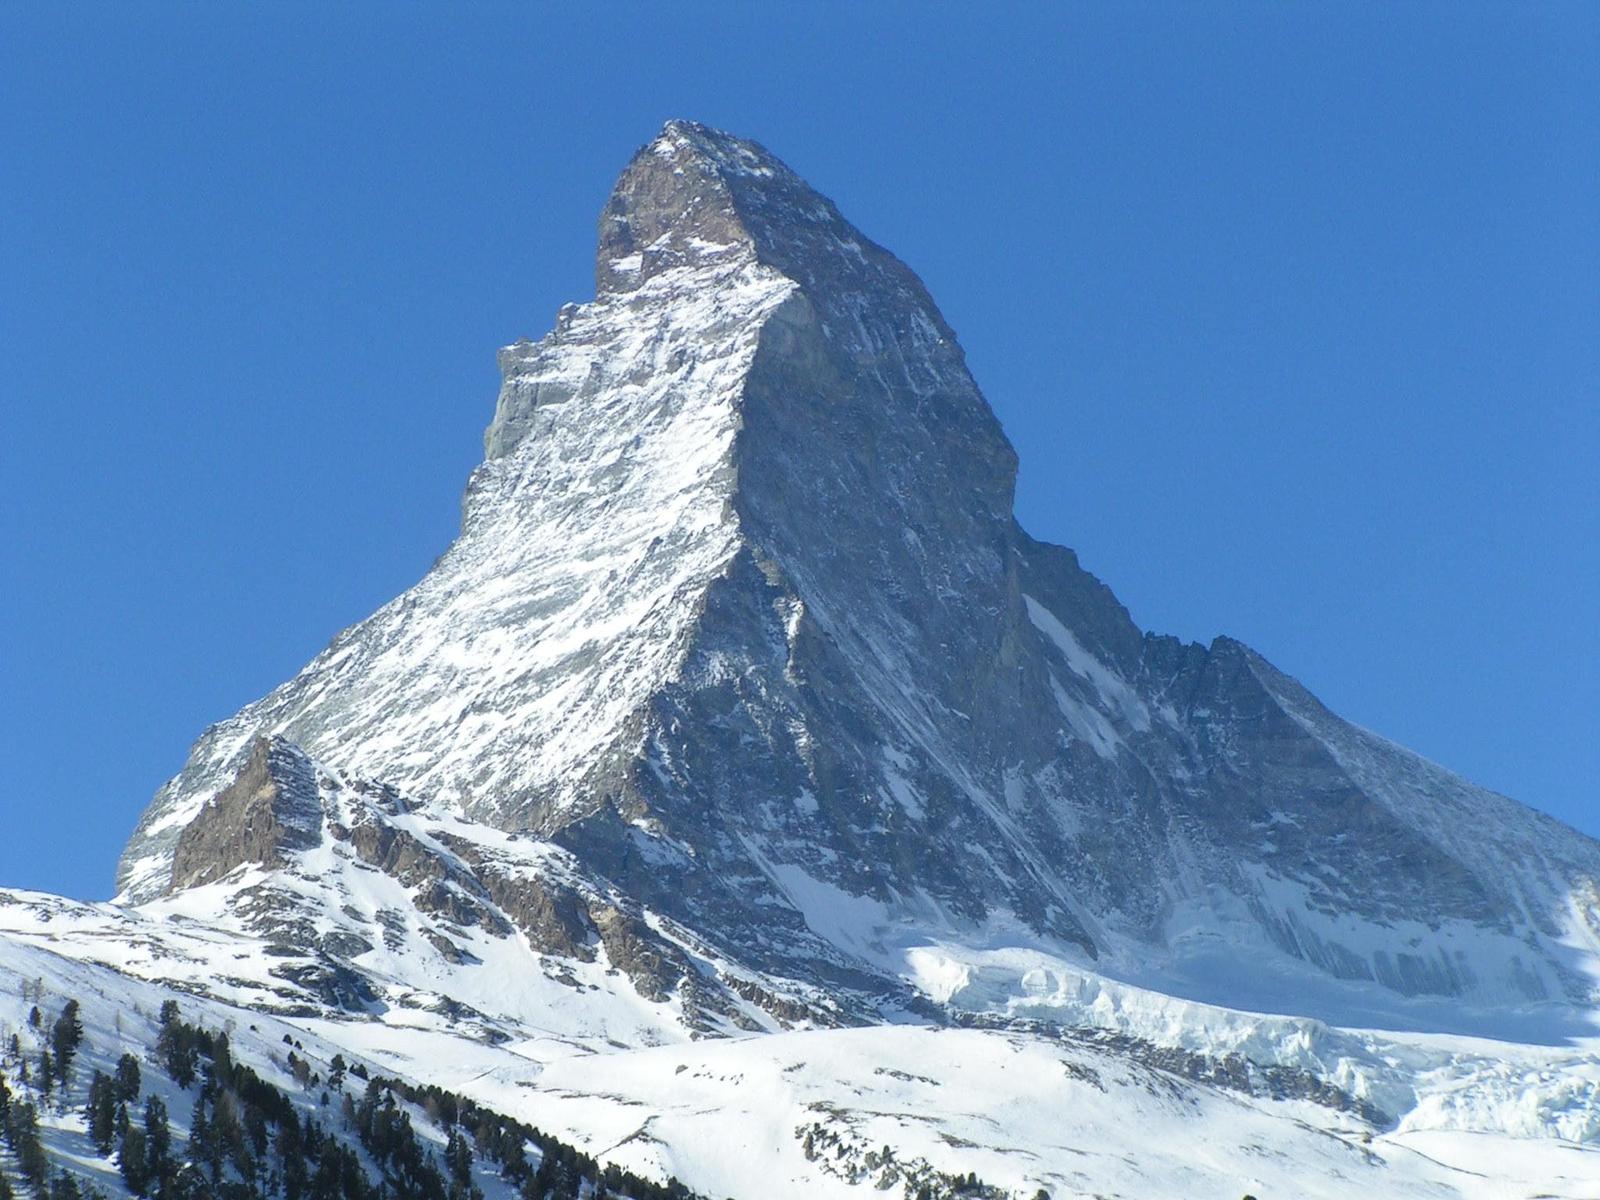 It’s That Easy — Score Big on This 30-Question ‘Round the World Quiz to Win Matterhorn